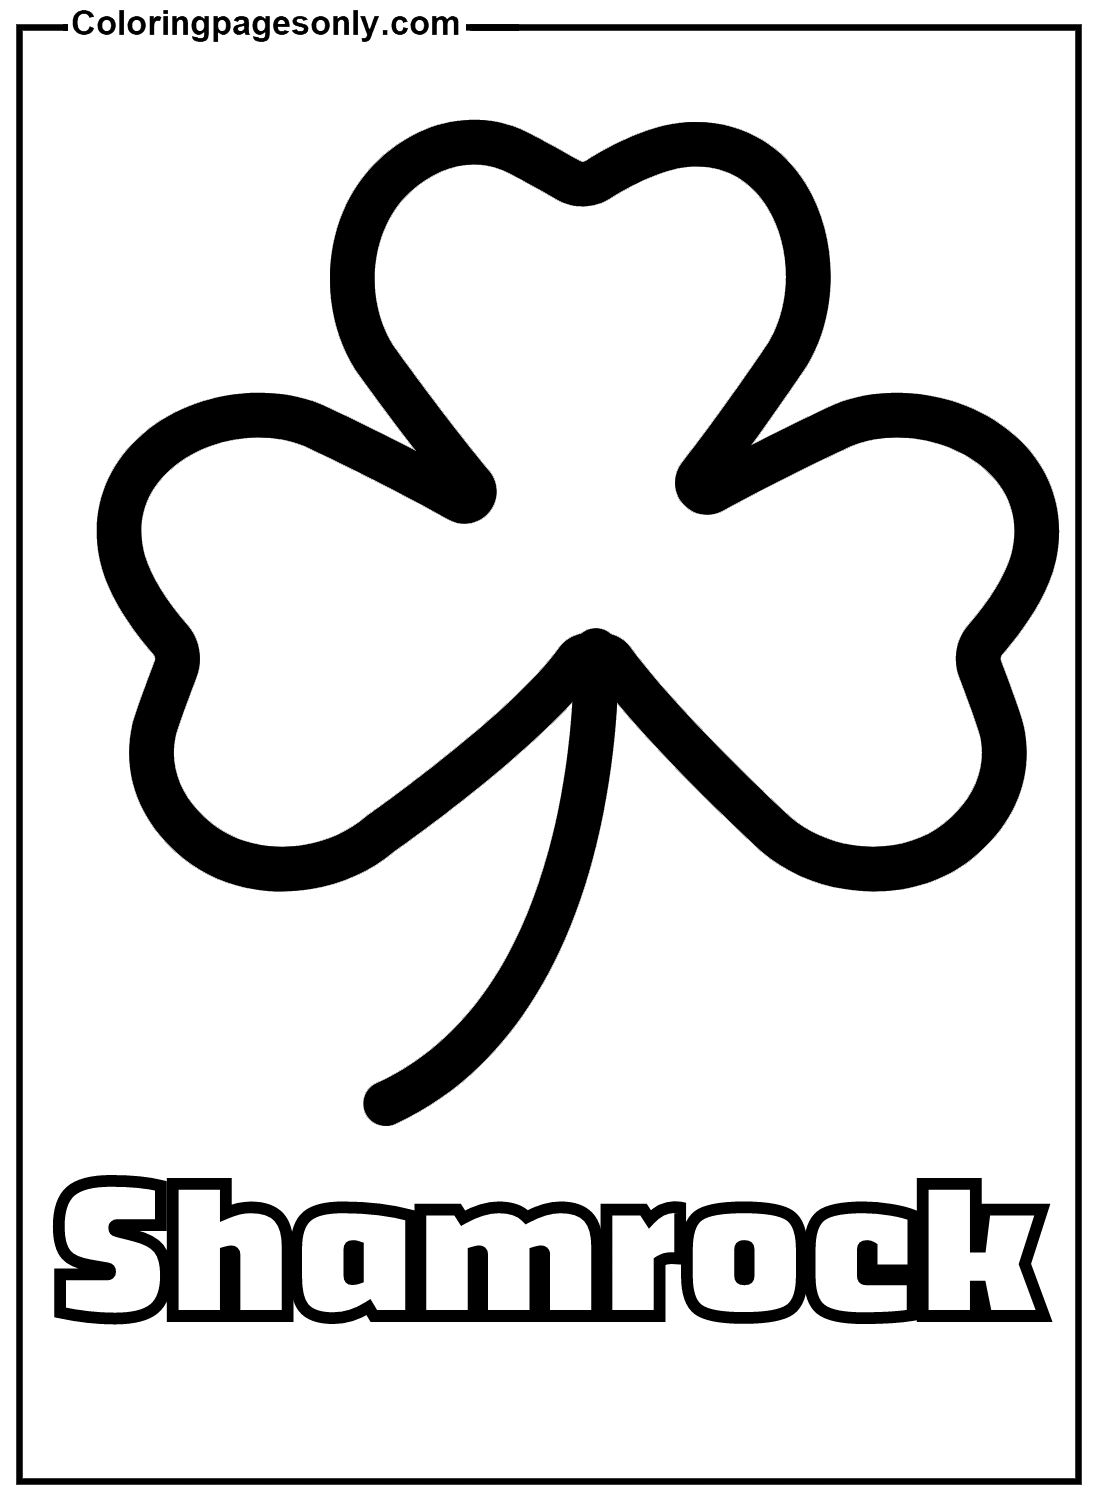 Shamrock Free Coloring Pages